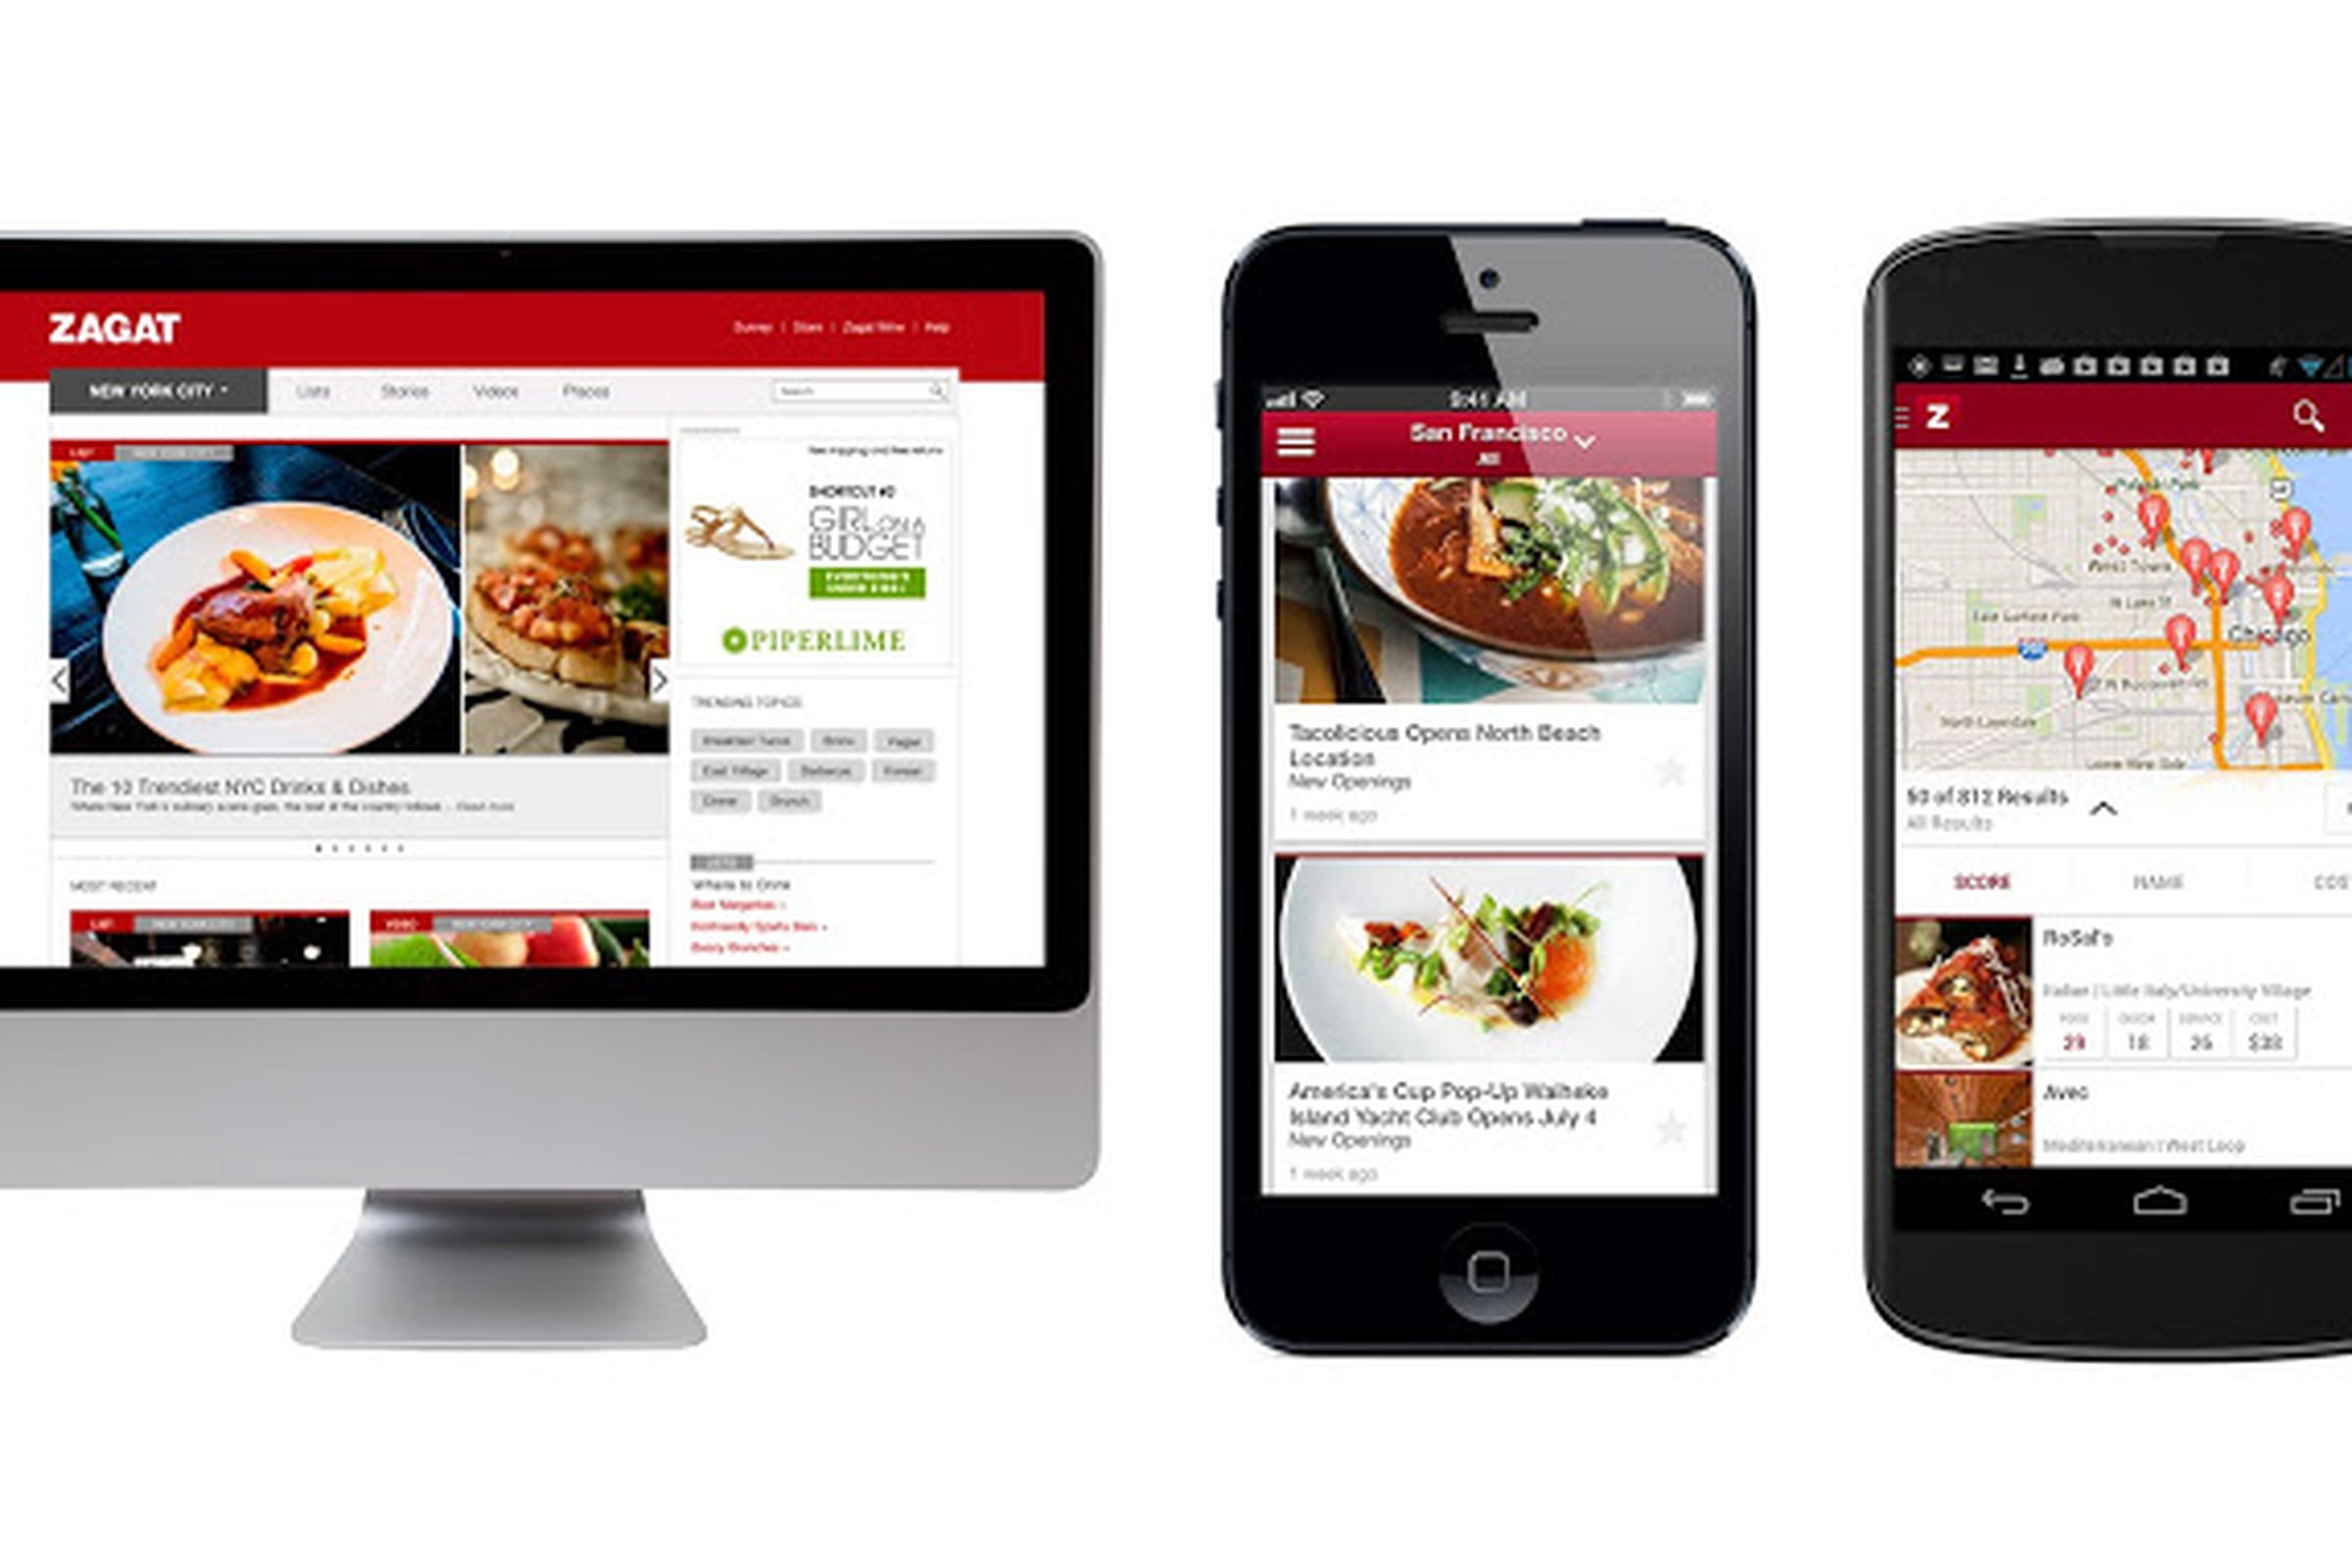 New Zagat apps and website